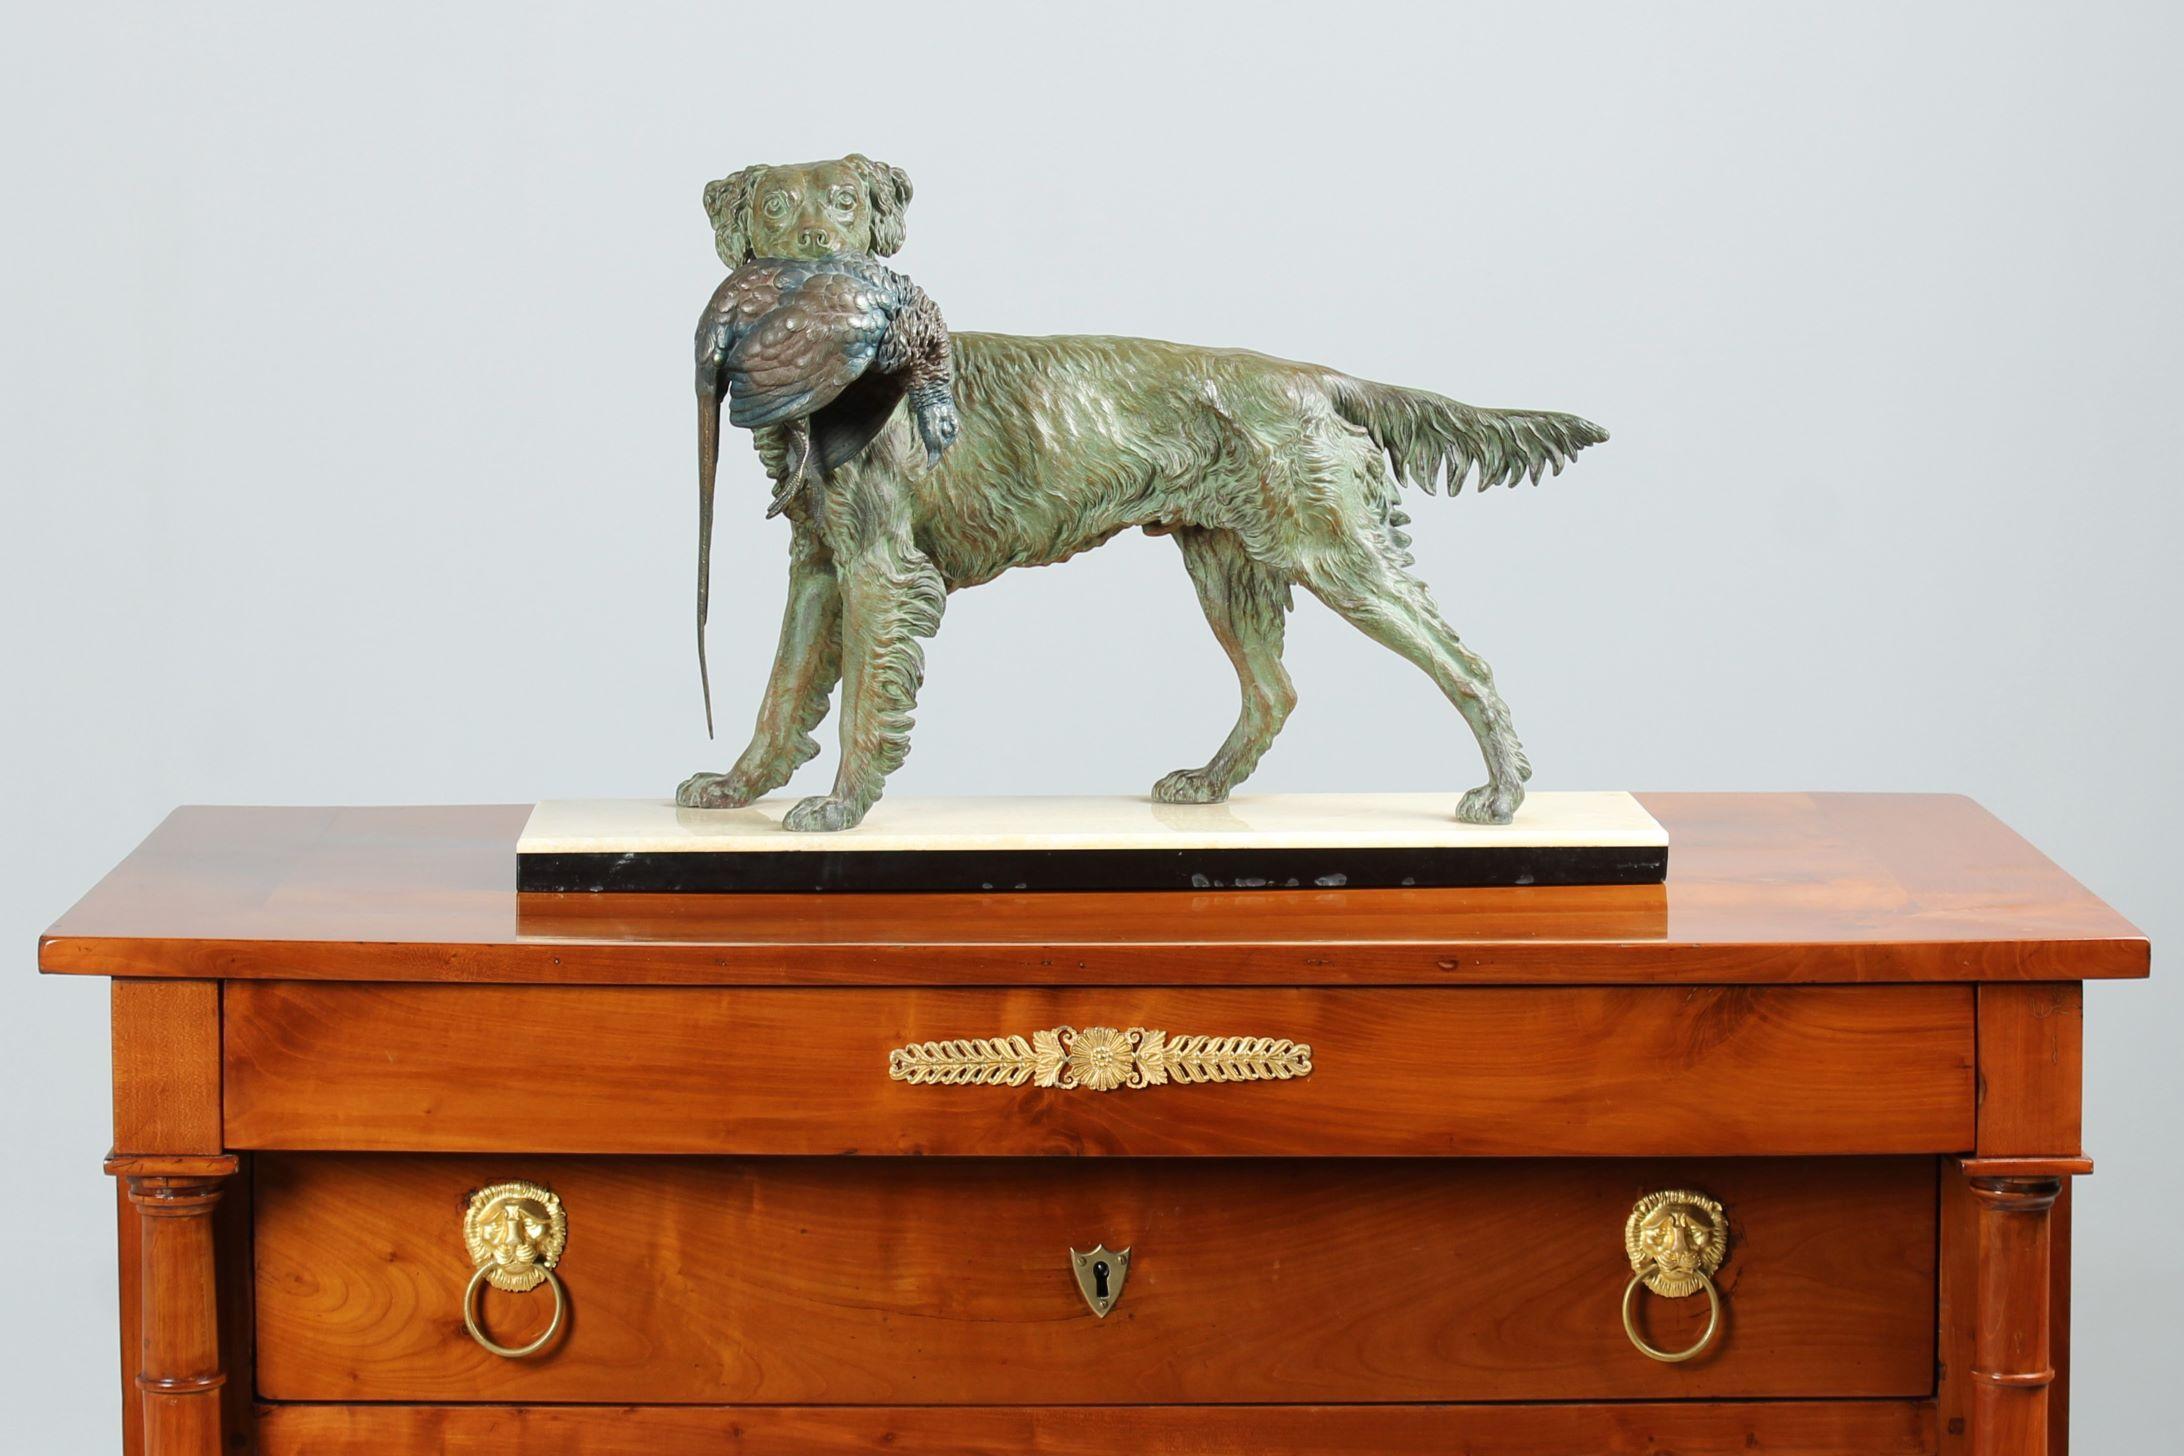 Hunting dog with pheasant from the early 20th century.
Based on a design by Jules Moigniez from the 1860s. 

Large version measuring H x W x D: 41 x 65 x 18 cm.

Realistic and lifelike depiction of a spaniel retrieving a pheasant. 
Made of cast zinc